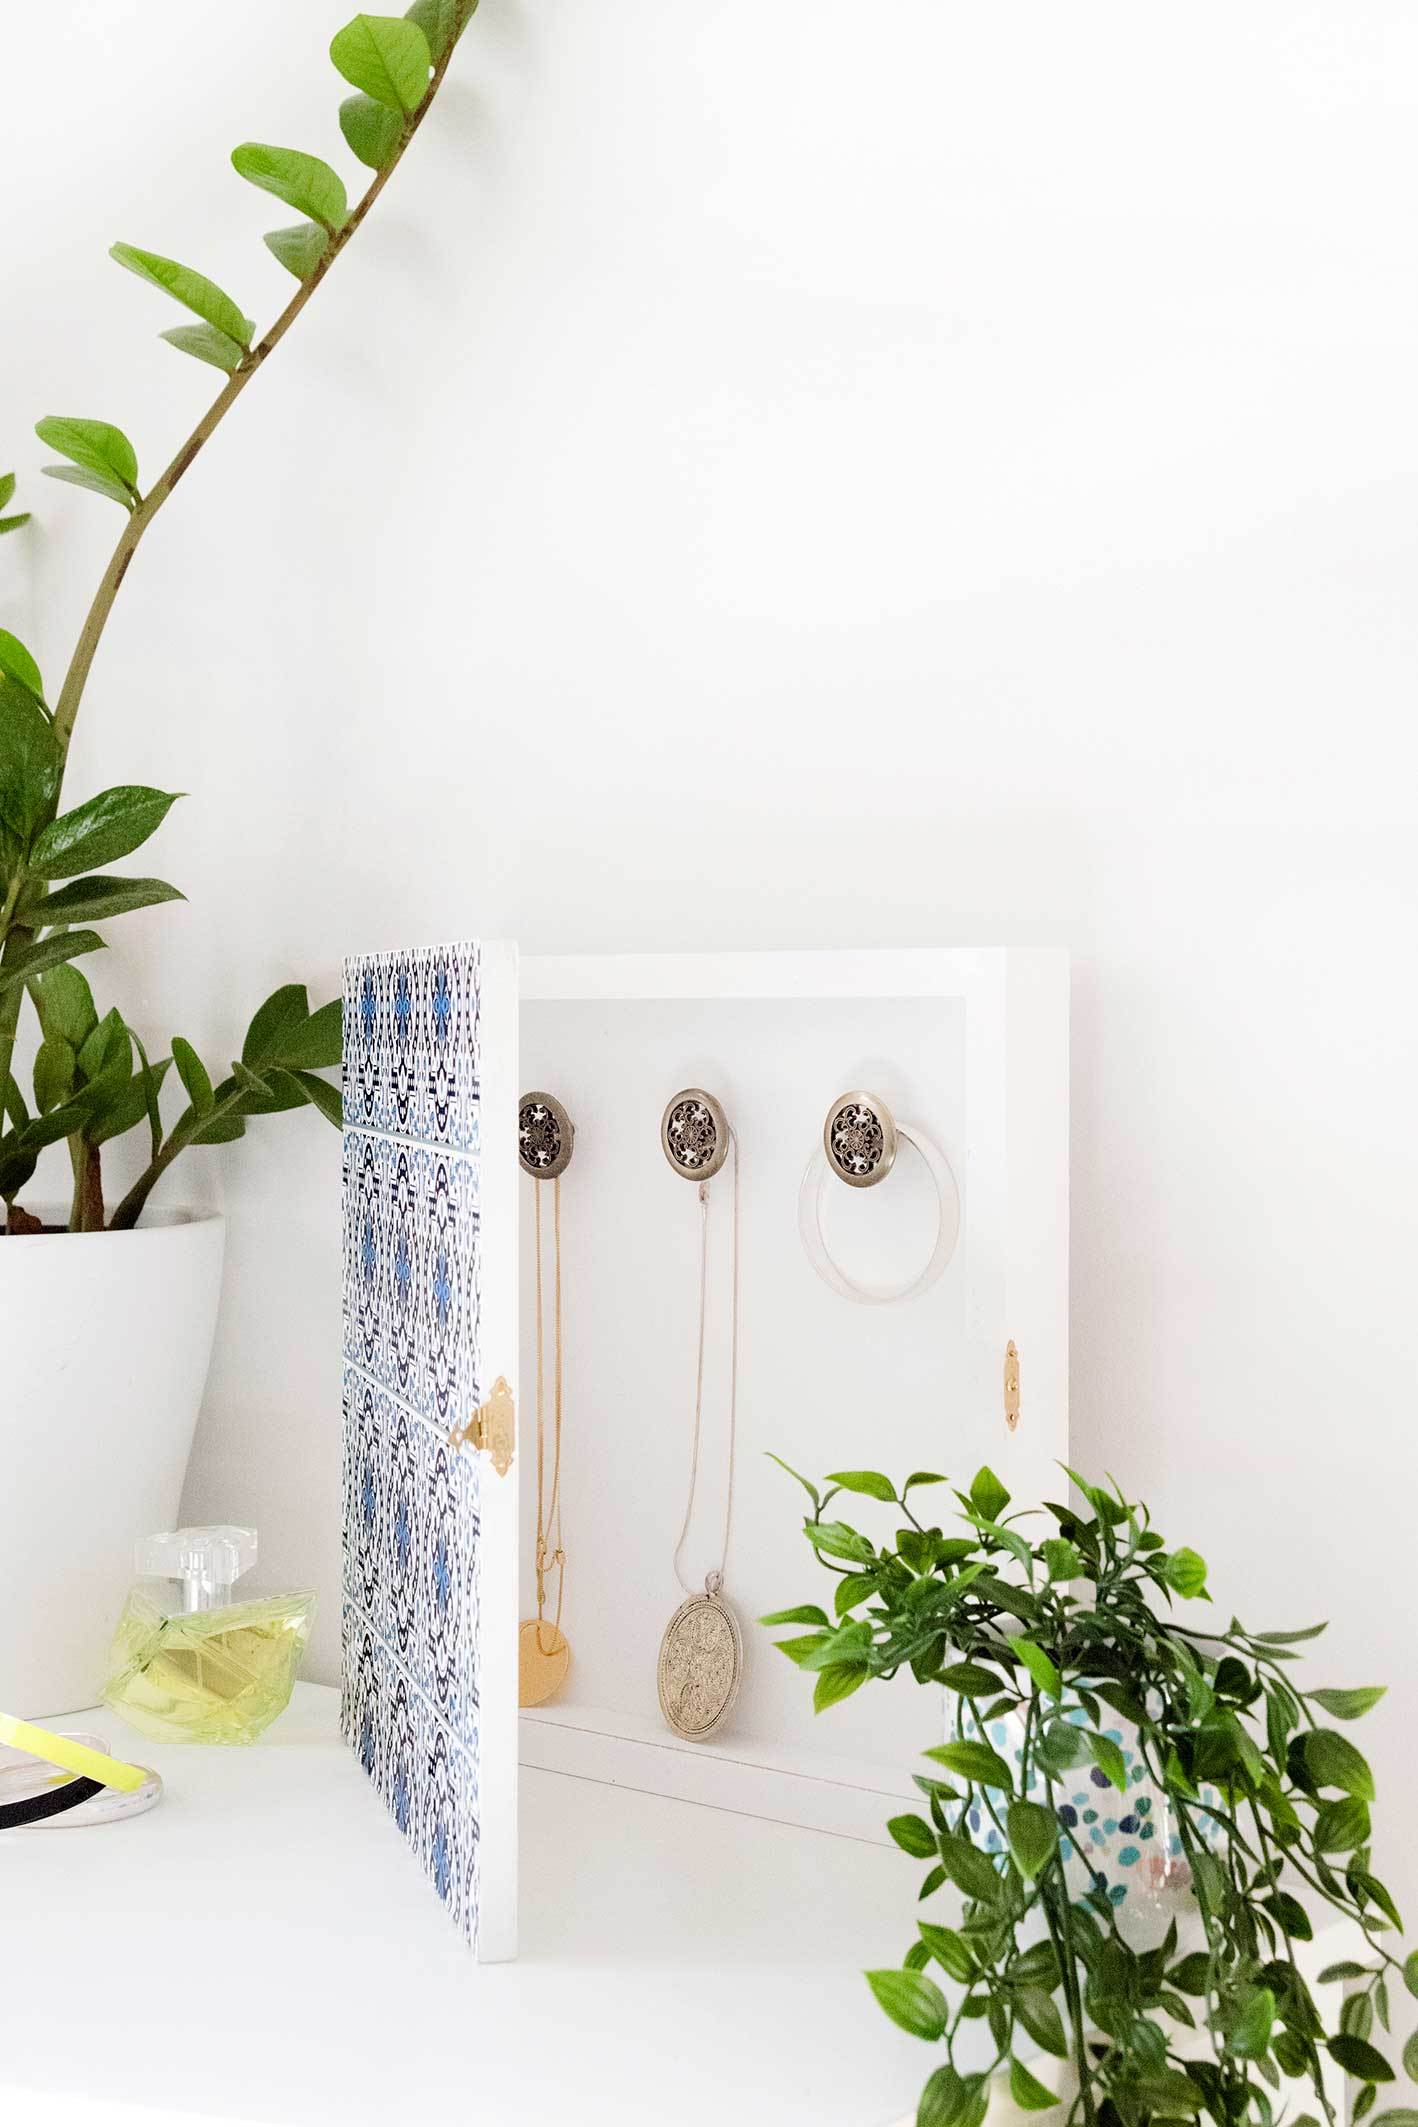 Jewelry organizer cleverly disguised as wall art